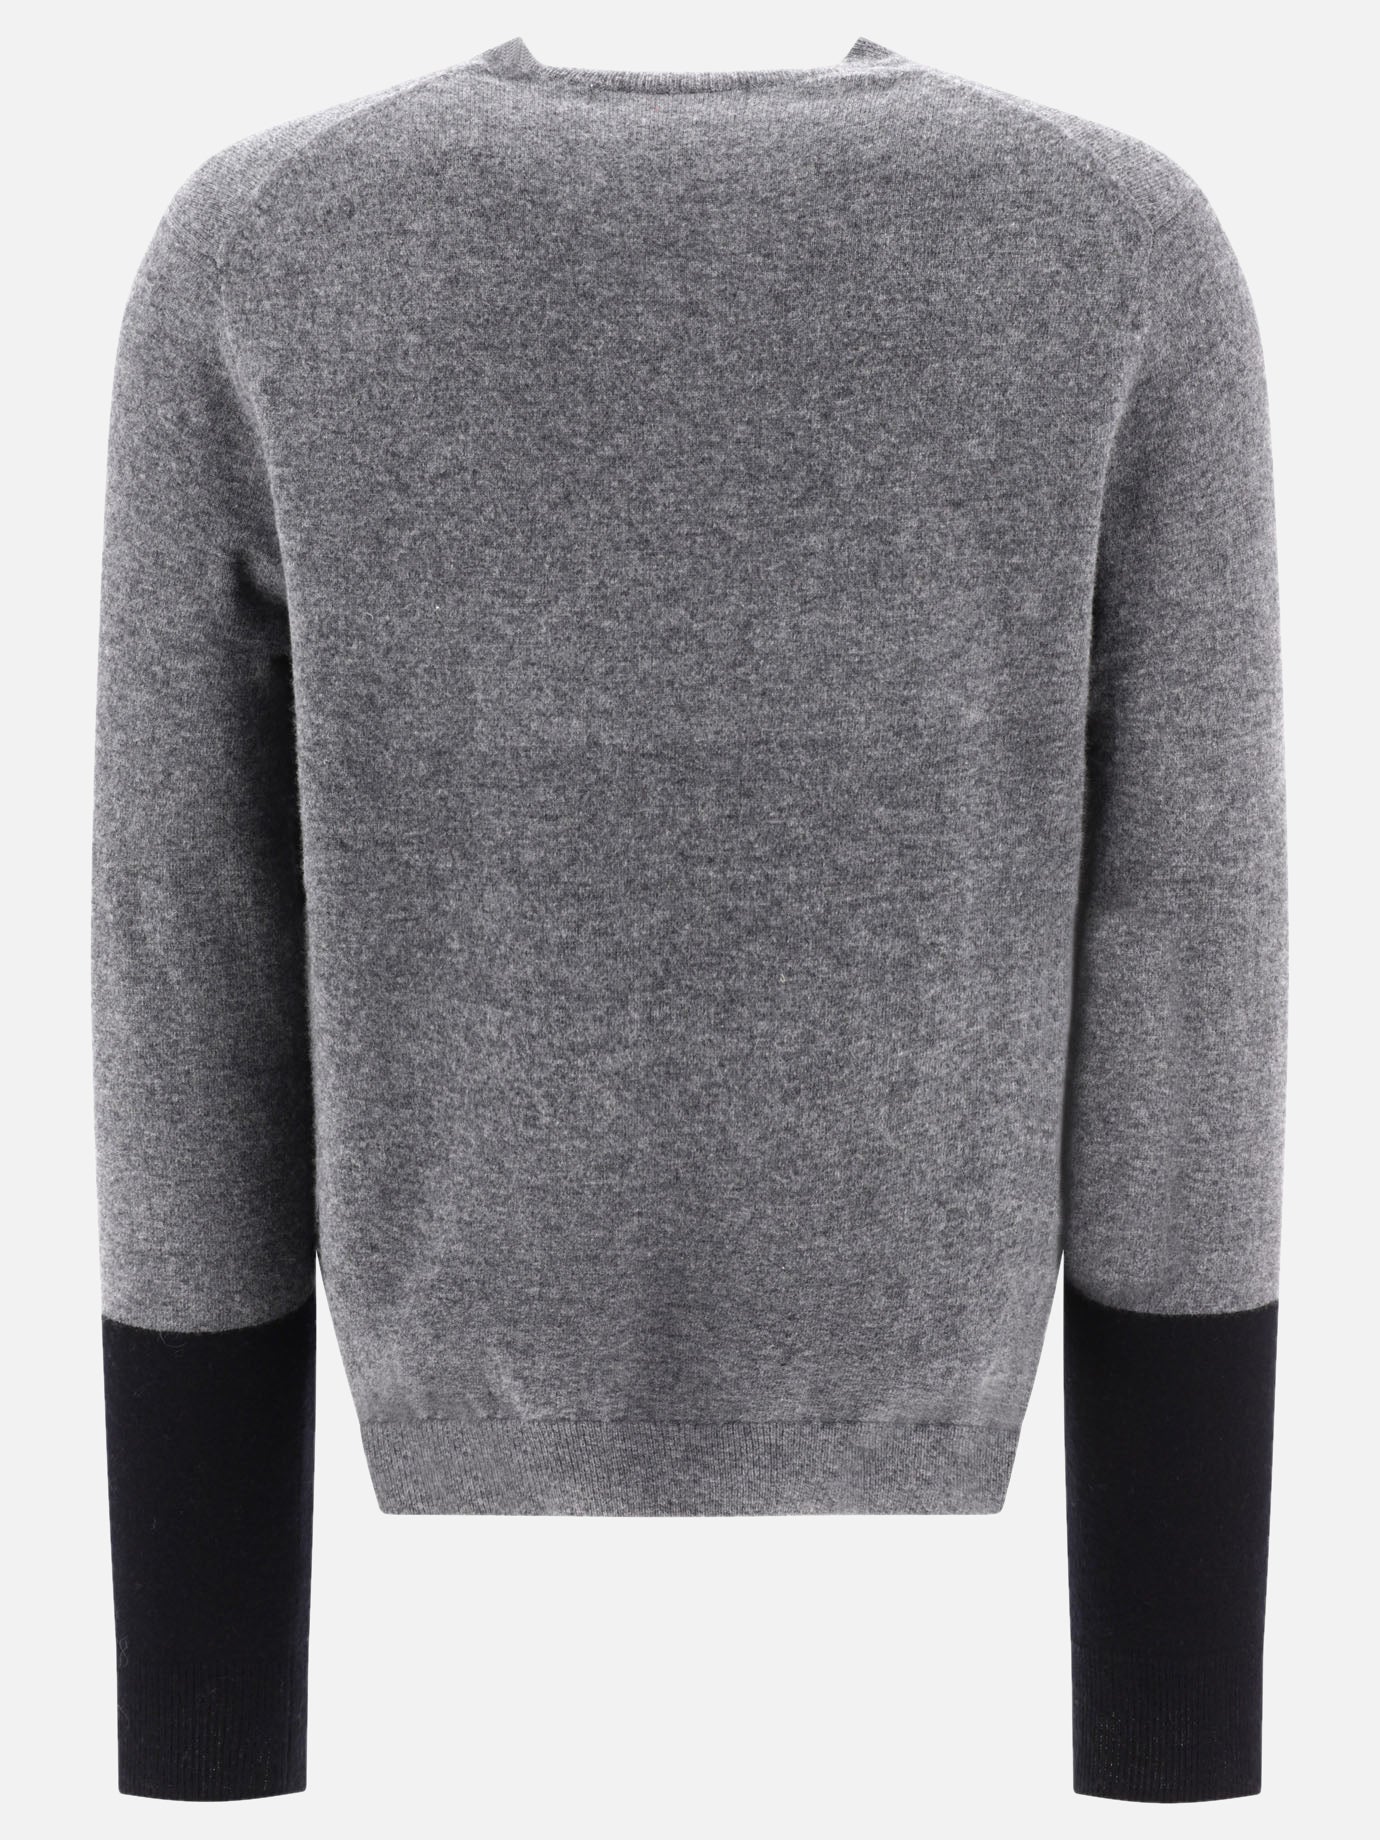 Sweater with contrasting sleeves